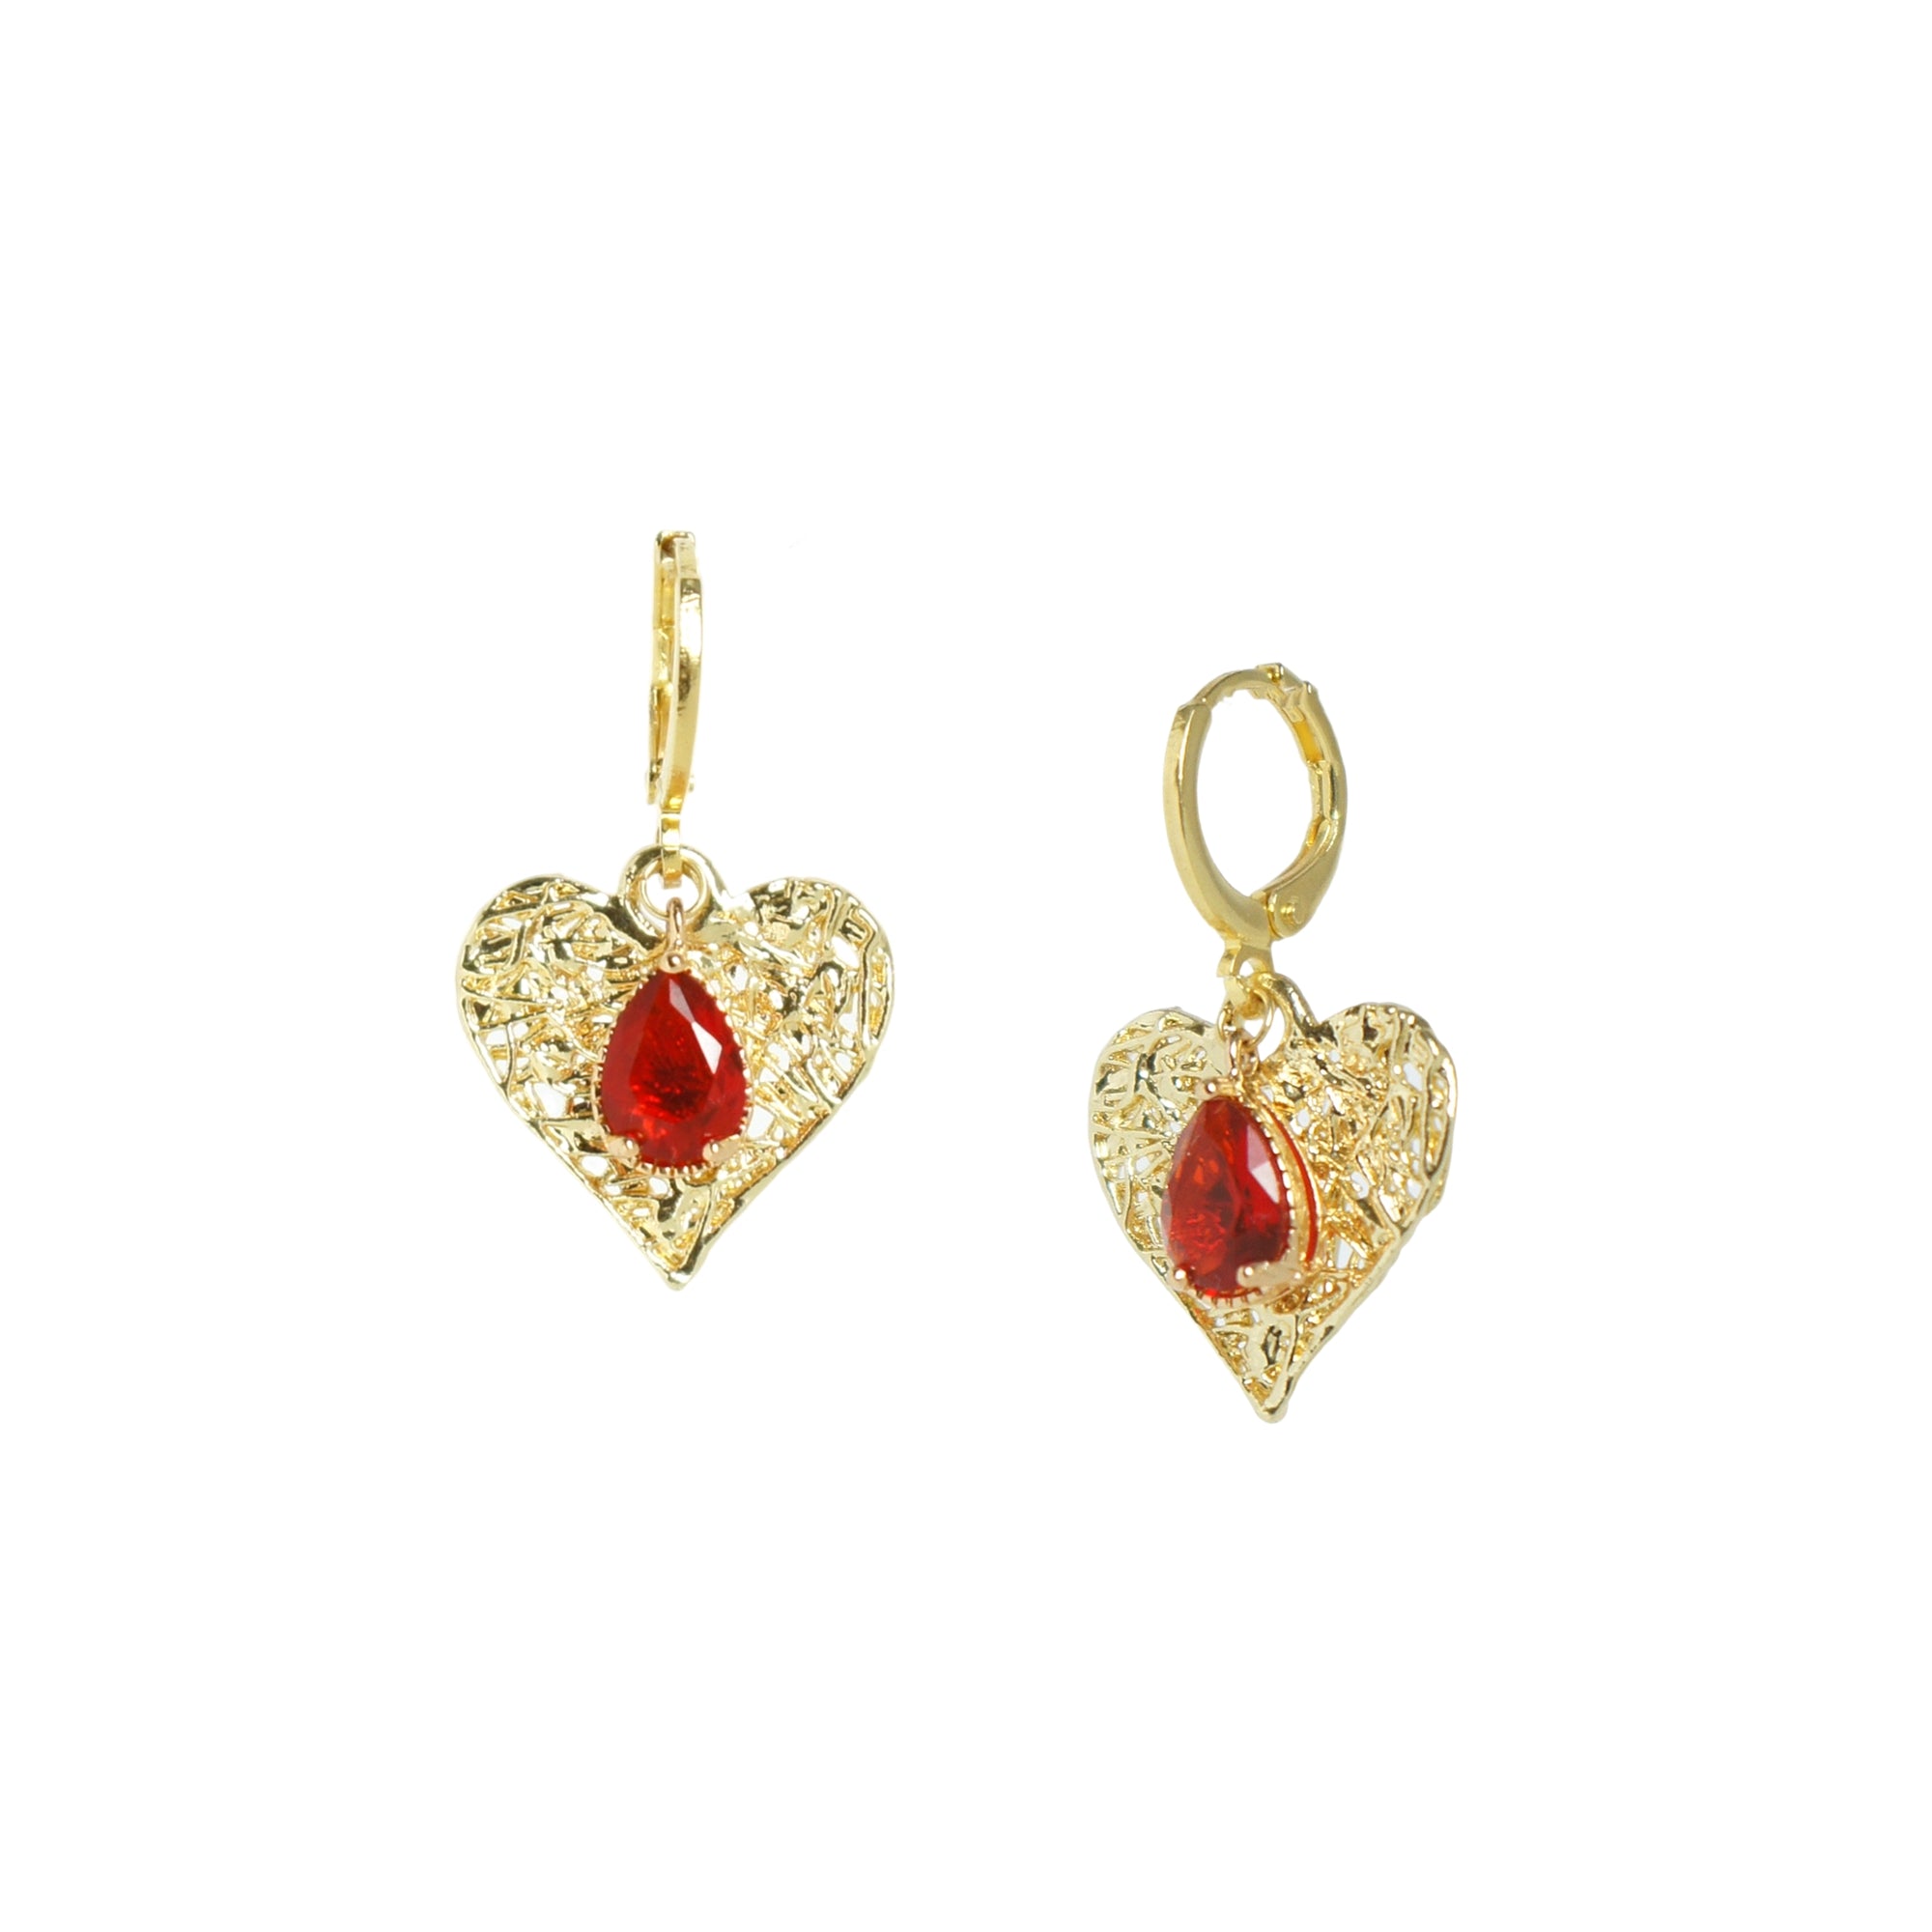 My Precious Crystal and Textured Heart Drop Earrings